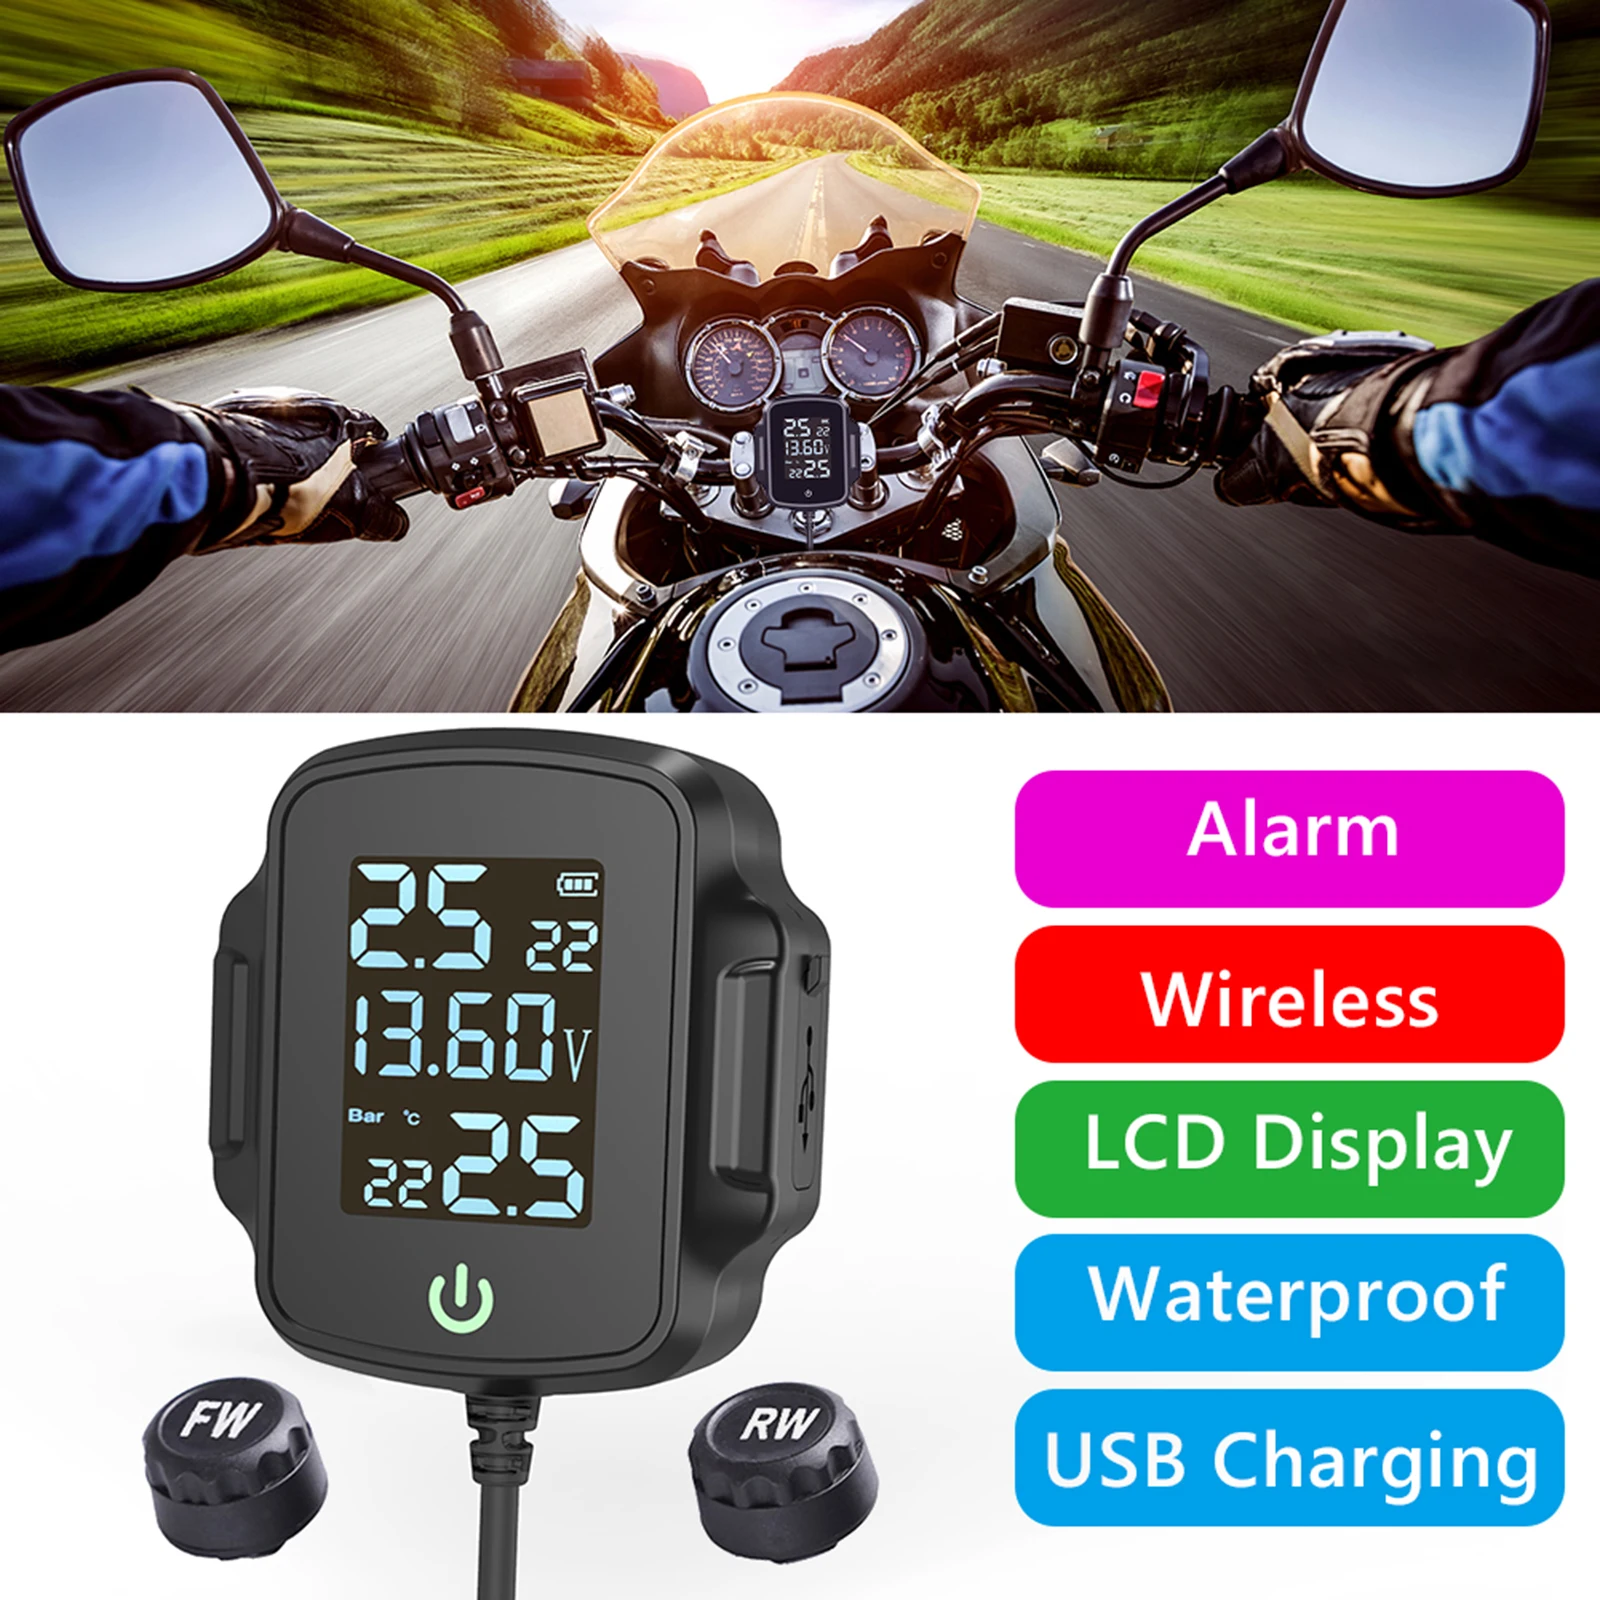 Motorcycle TPMS Wireless Tire Pressure Monitoring System, IP67 Waterproof, Easy to Install, 3.0 USB Charger for Phone Tablet